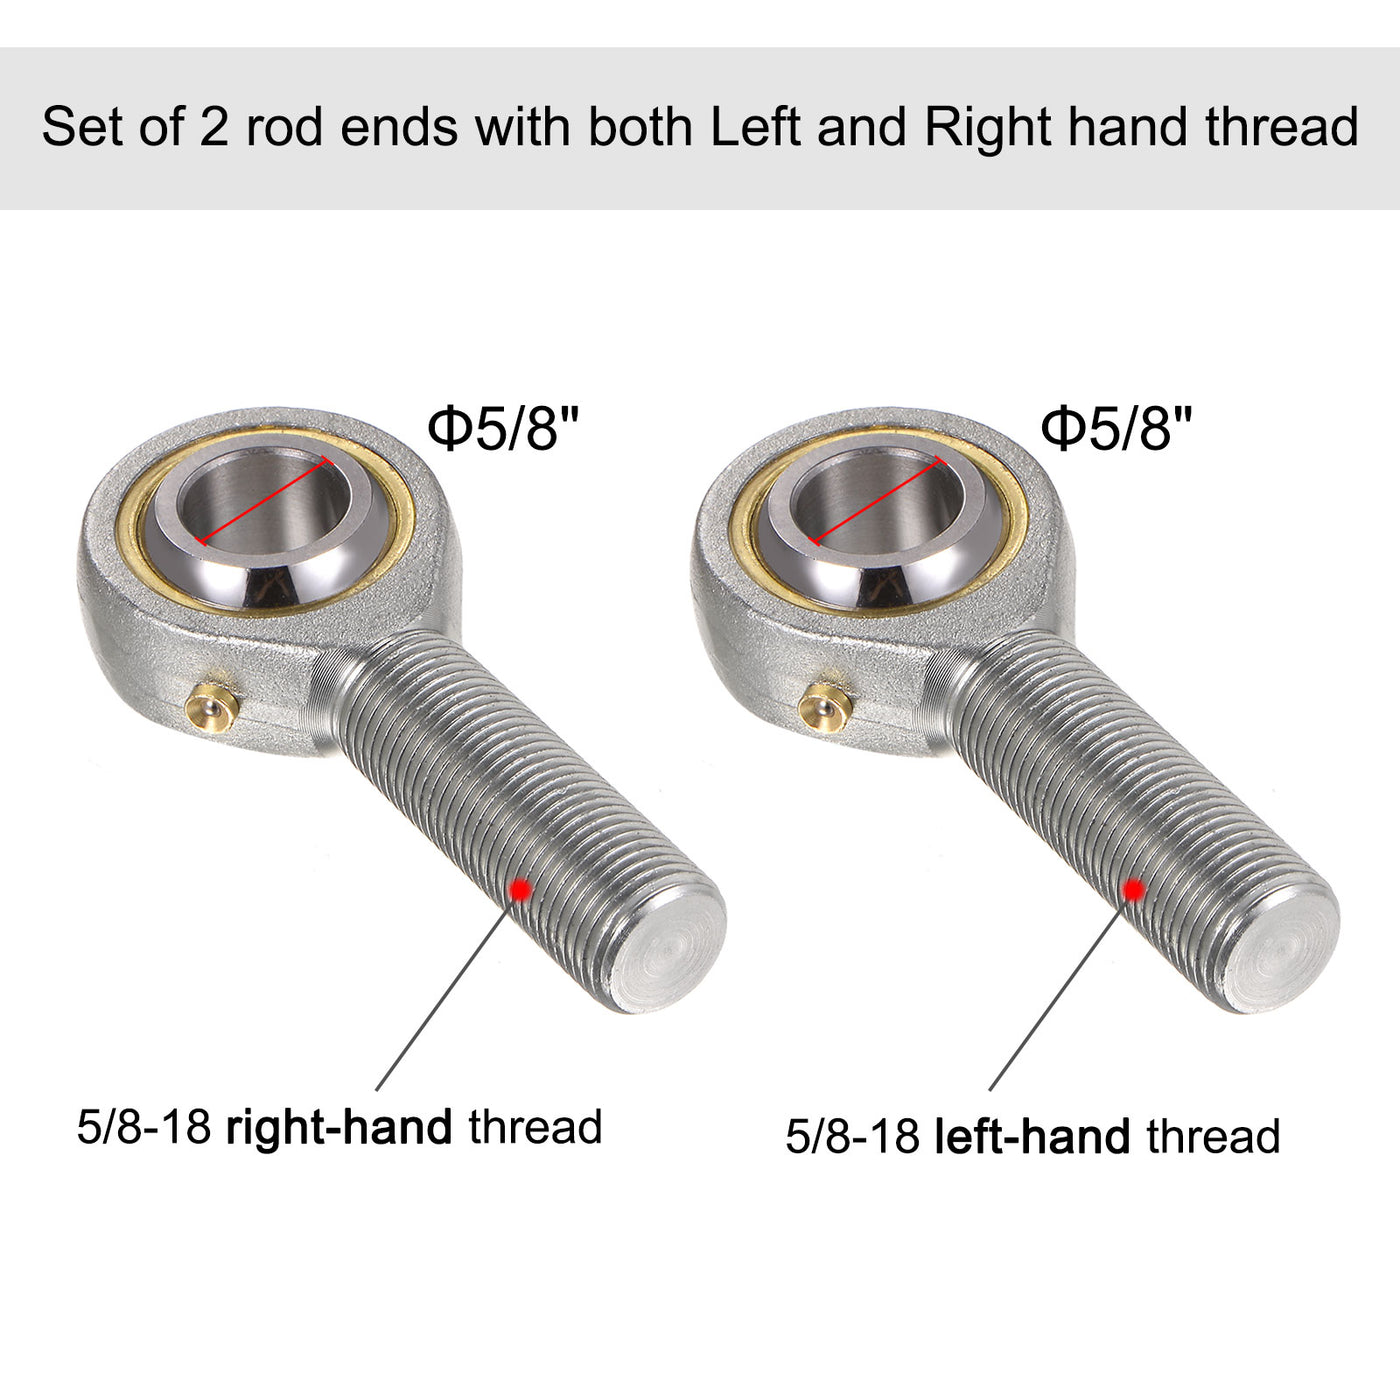 uxcell Uxcell POSB10 5/8" Male Rod End Set - 2pcs of 5/8-18 Left and Right Thread with Jam Nut